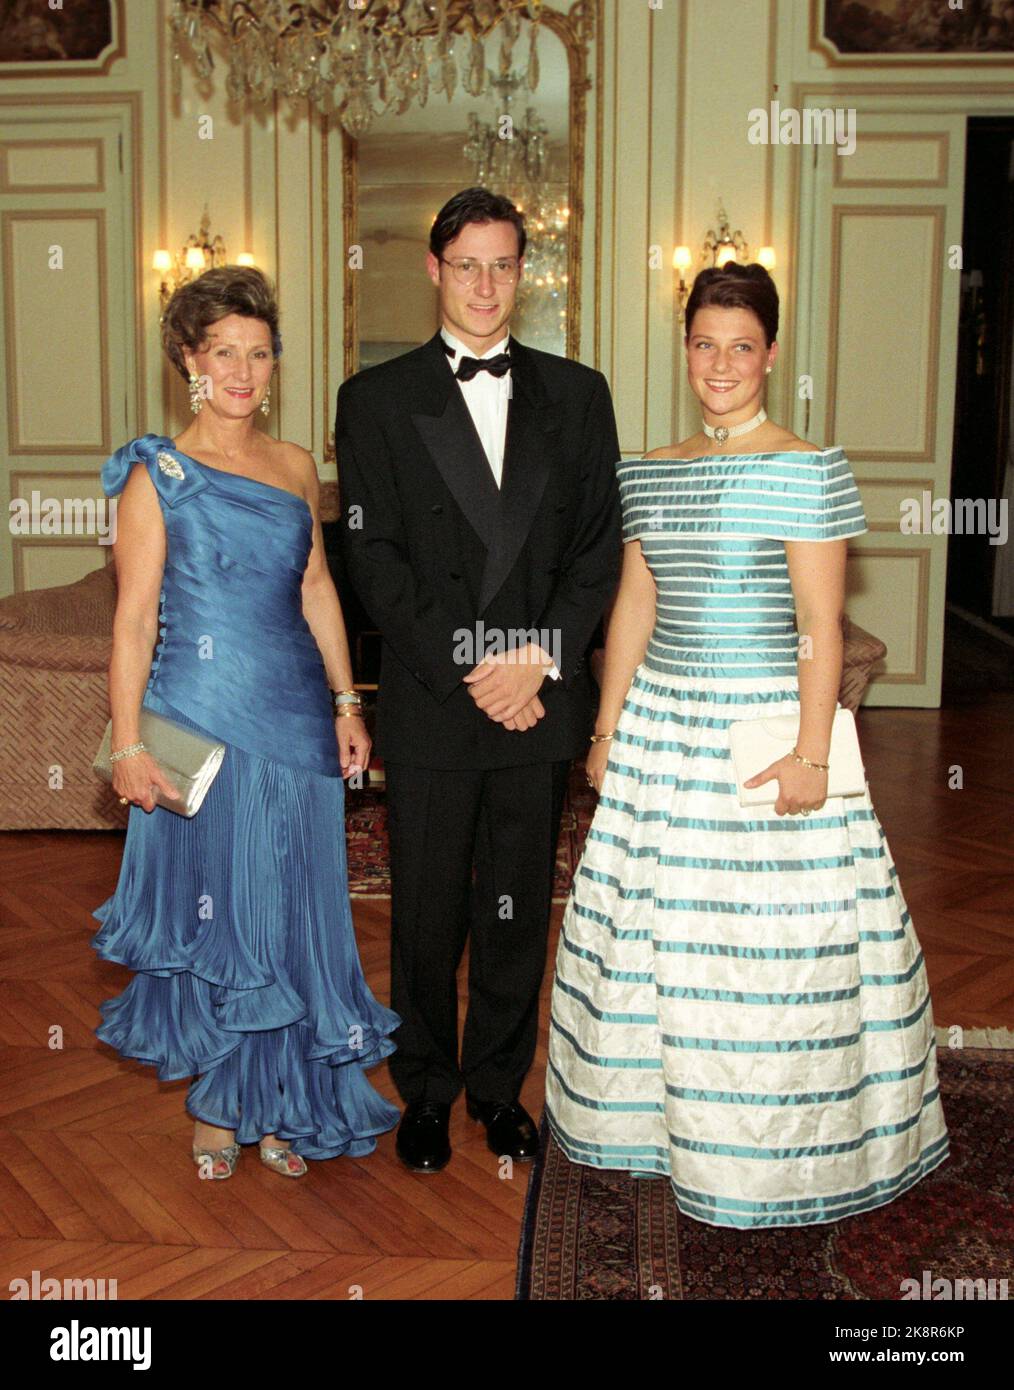 Paris 19940923. Queen Sonja, Crown Prince Haakon and Princess Märtha Louise  in Paris on the occasion of weddings in the Duch family of Luxembourg. The  picture: The Norwegian embassy holds a gala